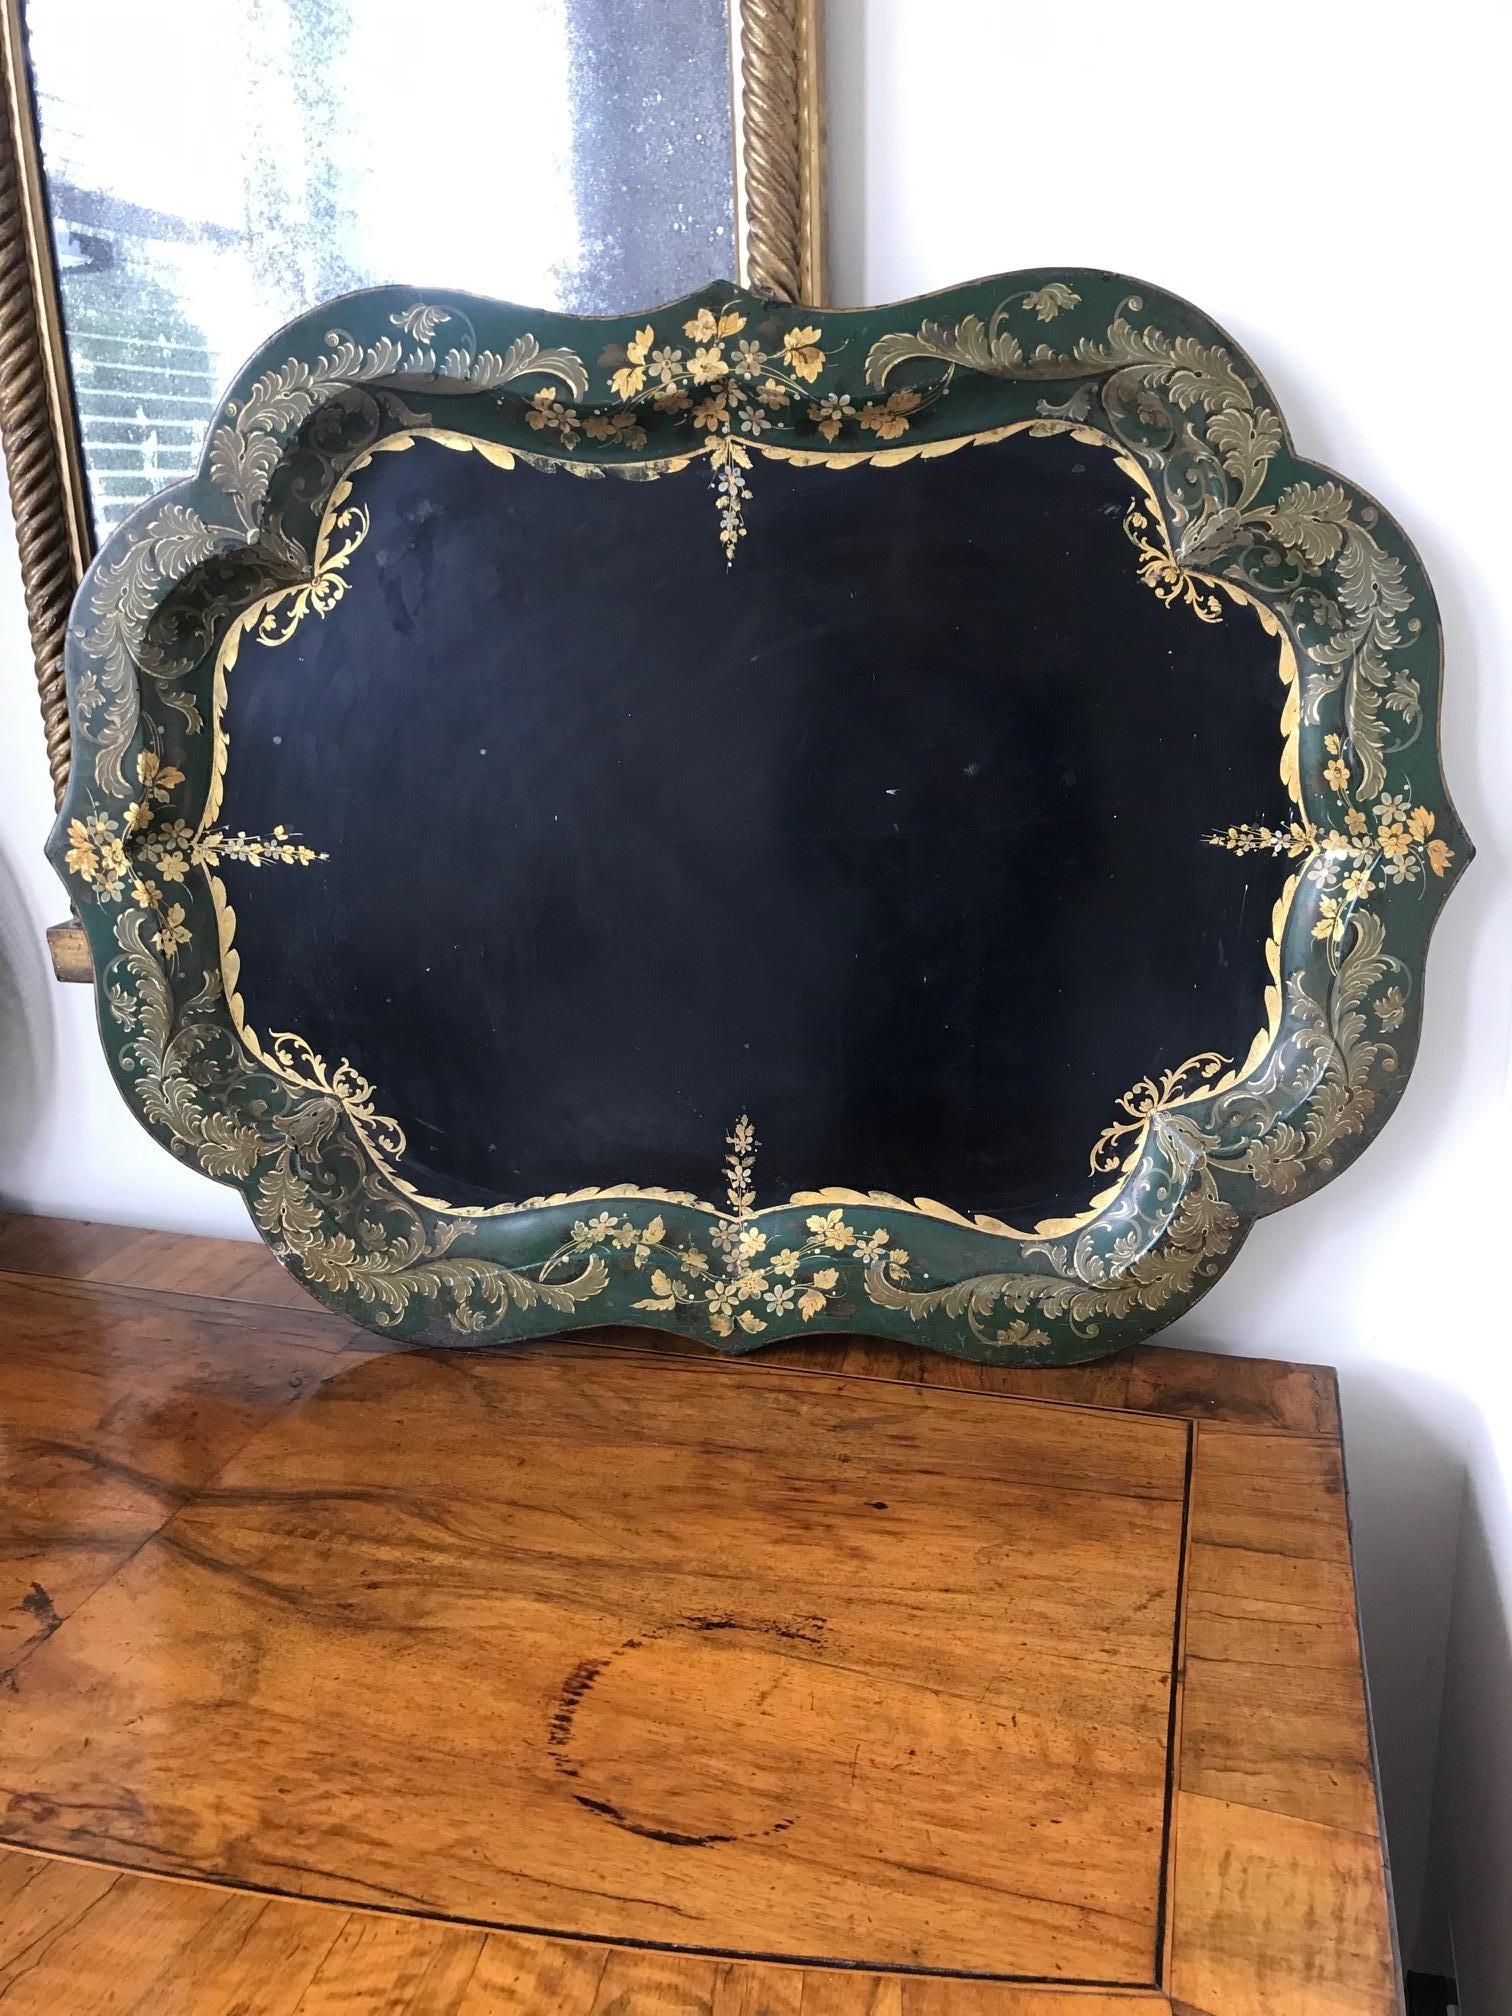 A French 19th century large tole tray of elegant form with distinctive black color and hand painted gold leaf foliage detail, on green colored border.